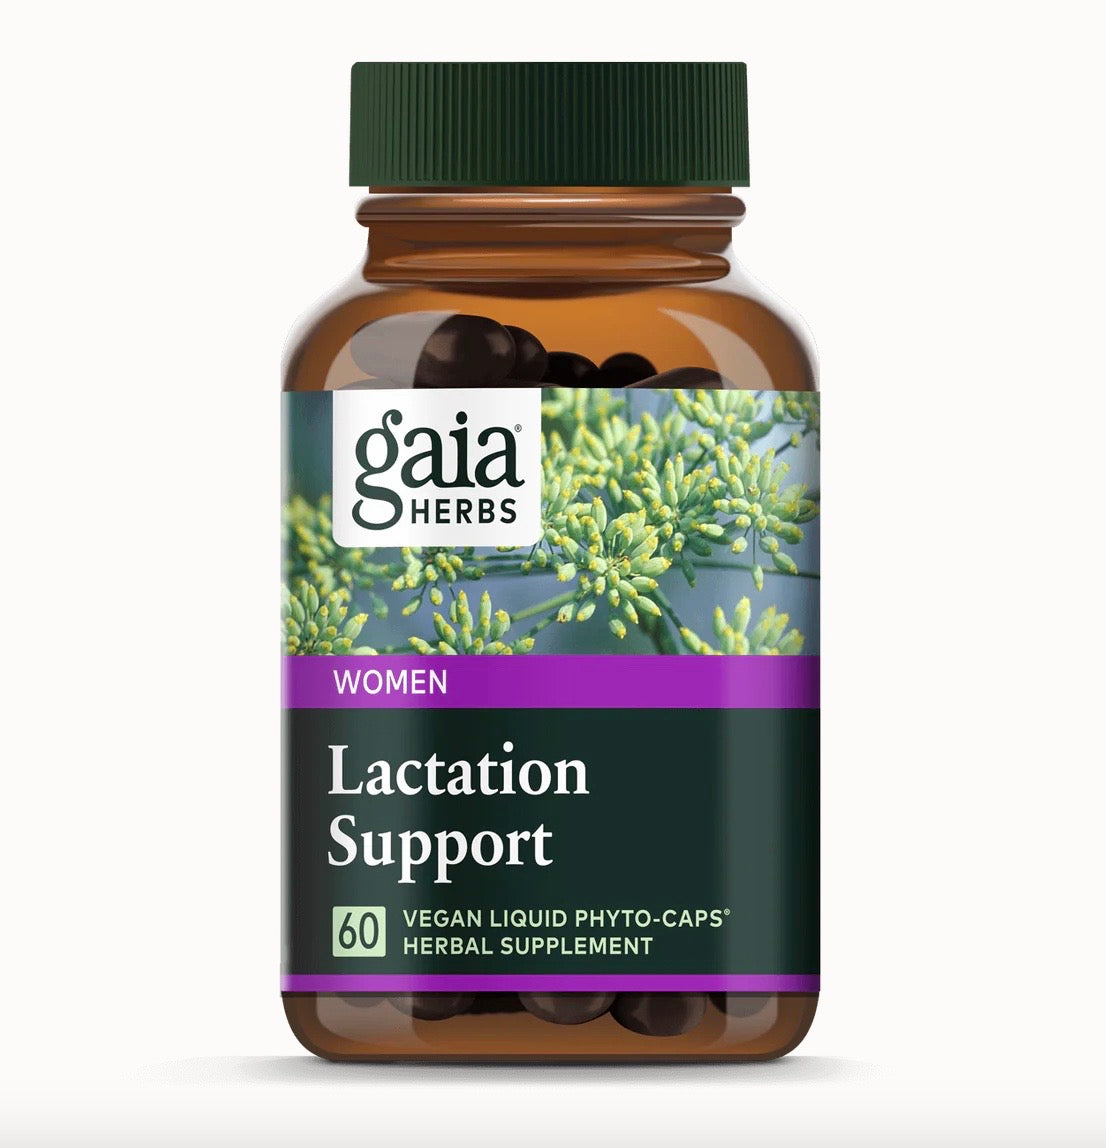 Photo and link to Gaia's Lactation Support Herbs